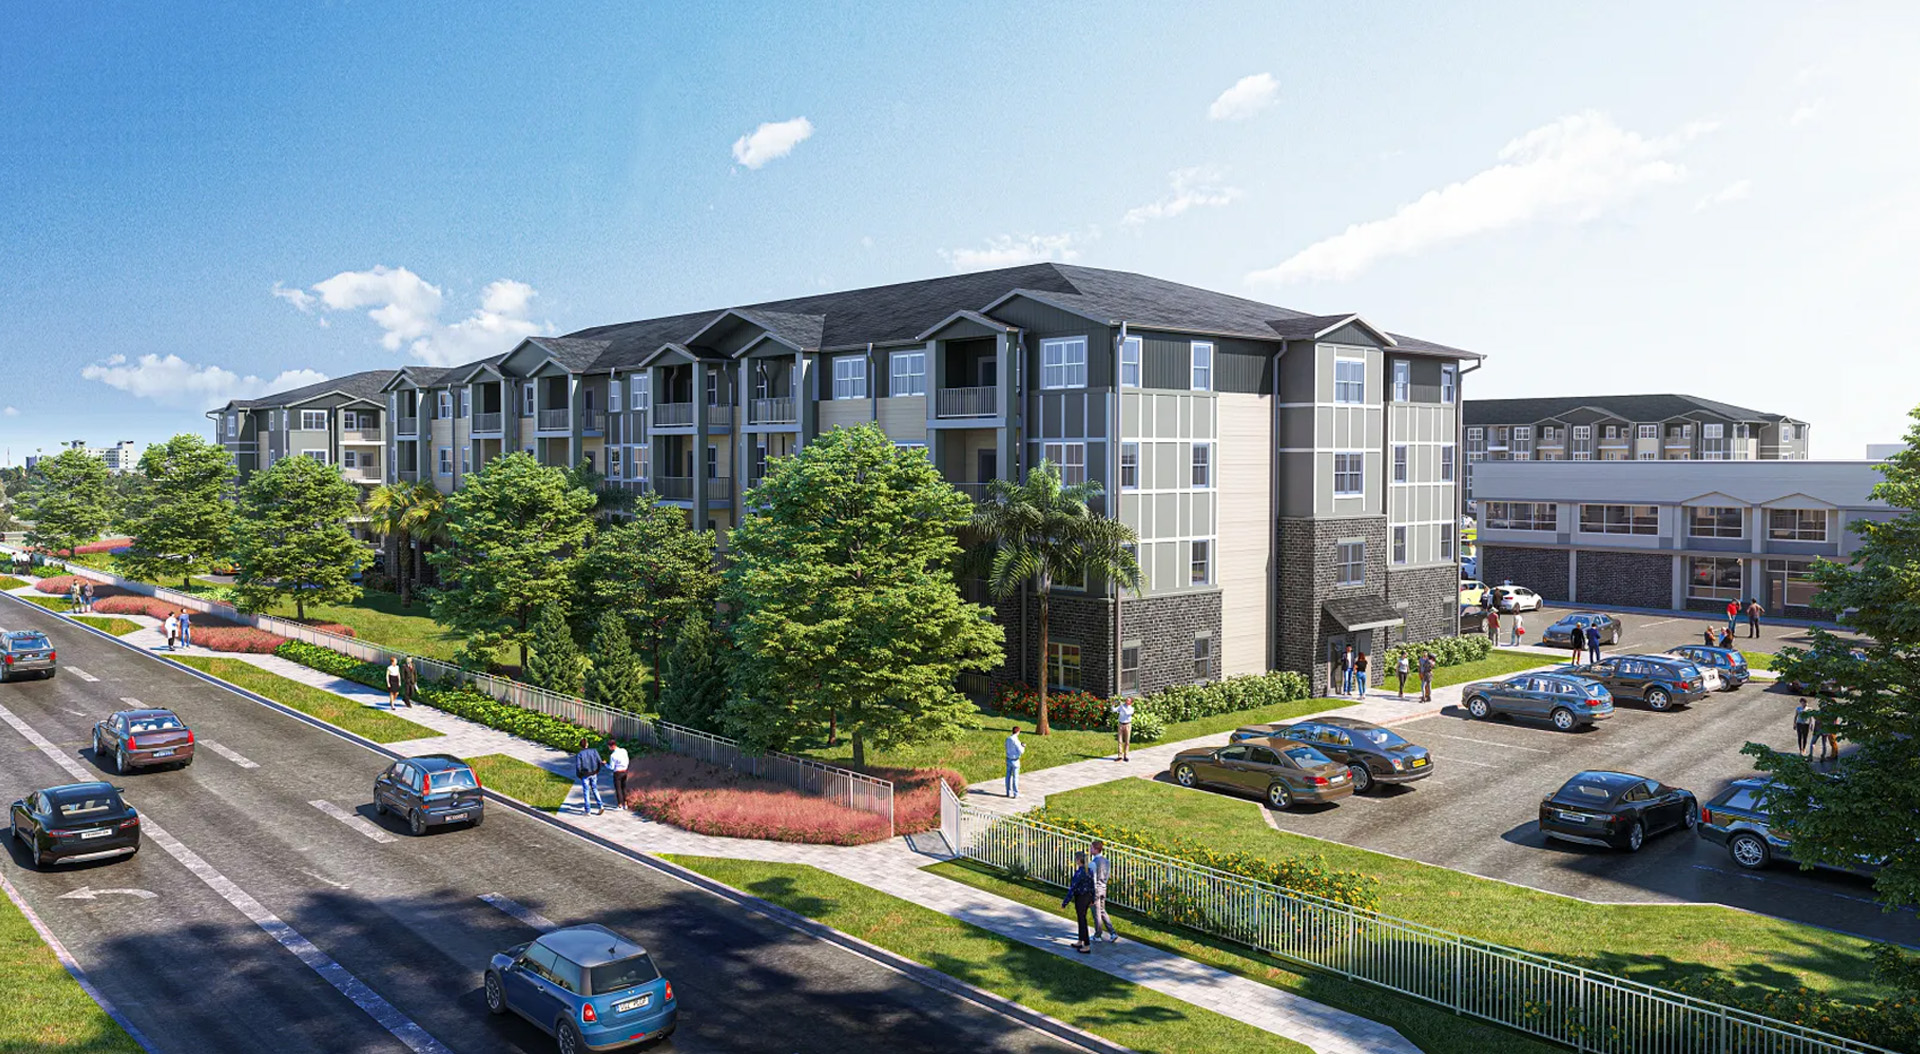 Wyld Oaks multifamily project planned Madison Oaks for mixed used development